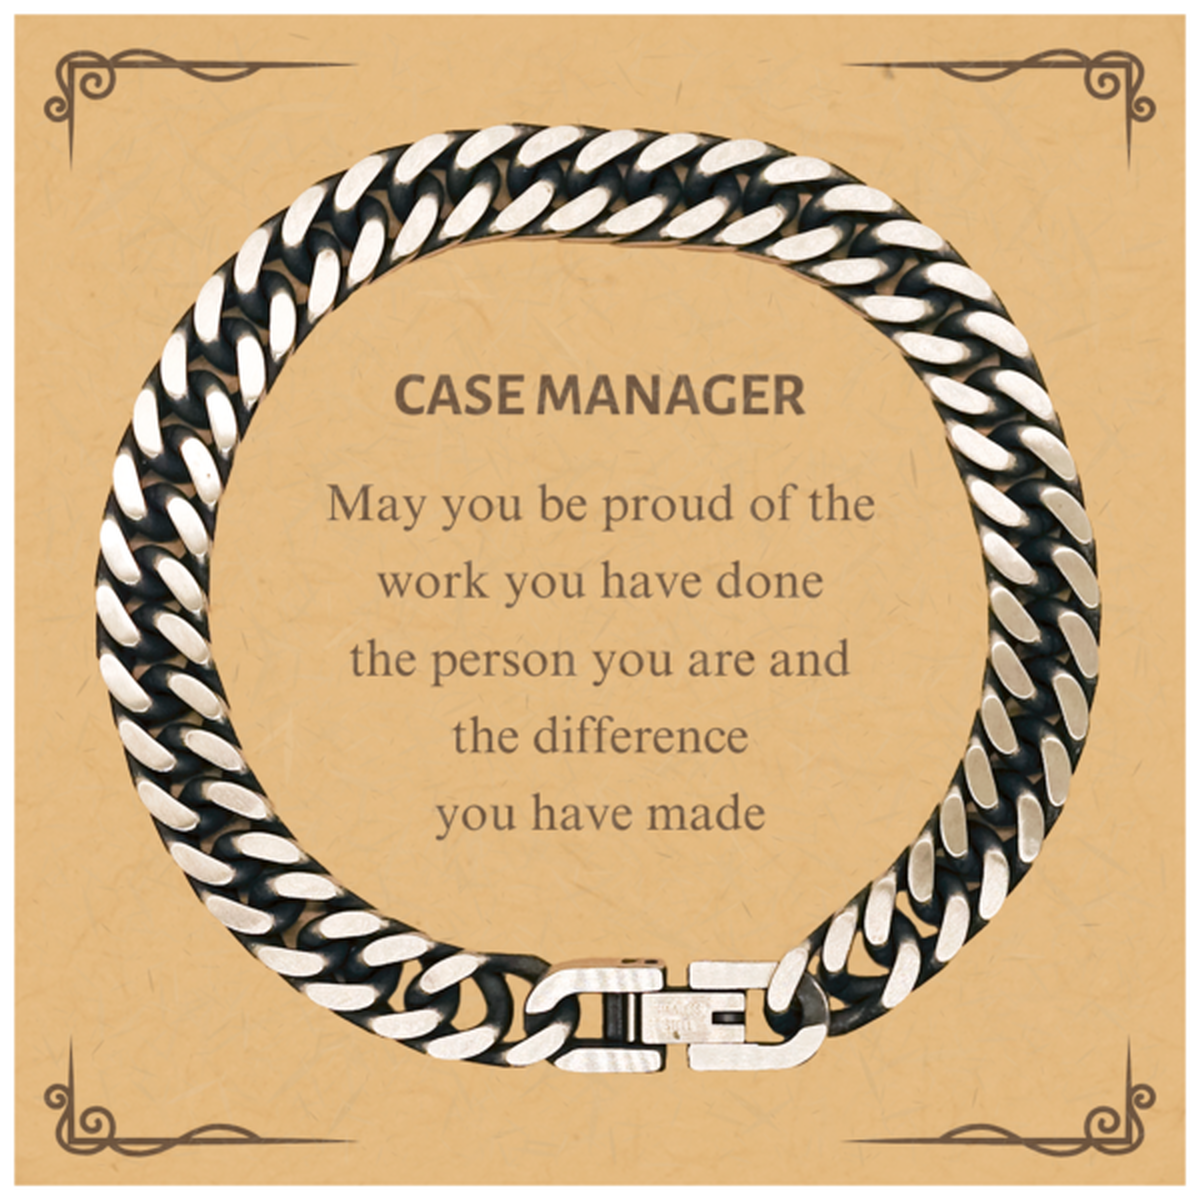 Case Manager May you be proud of the work you have done, Retirement Case Manager Cuban Link Chain Bracelet for Colleague Appreciation Gifts Amazing for Case Manager